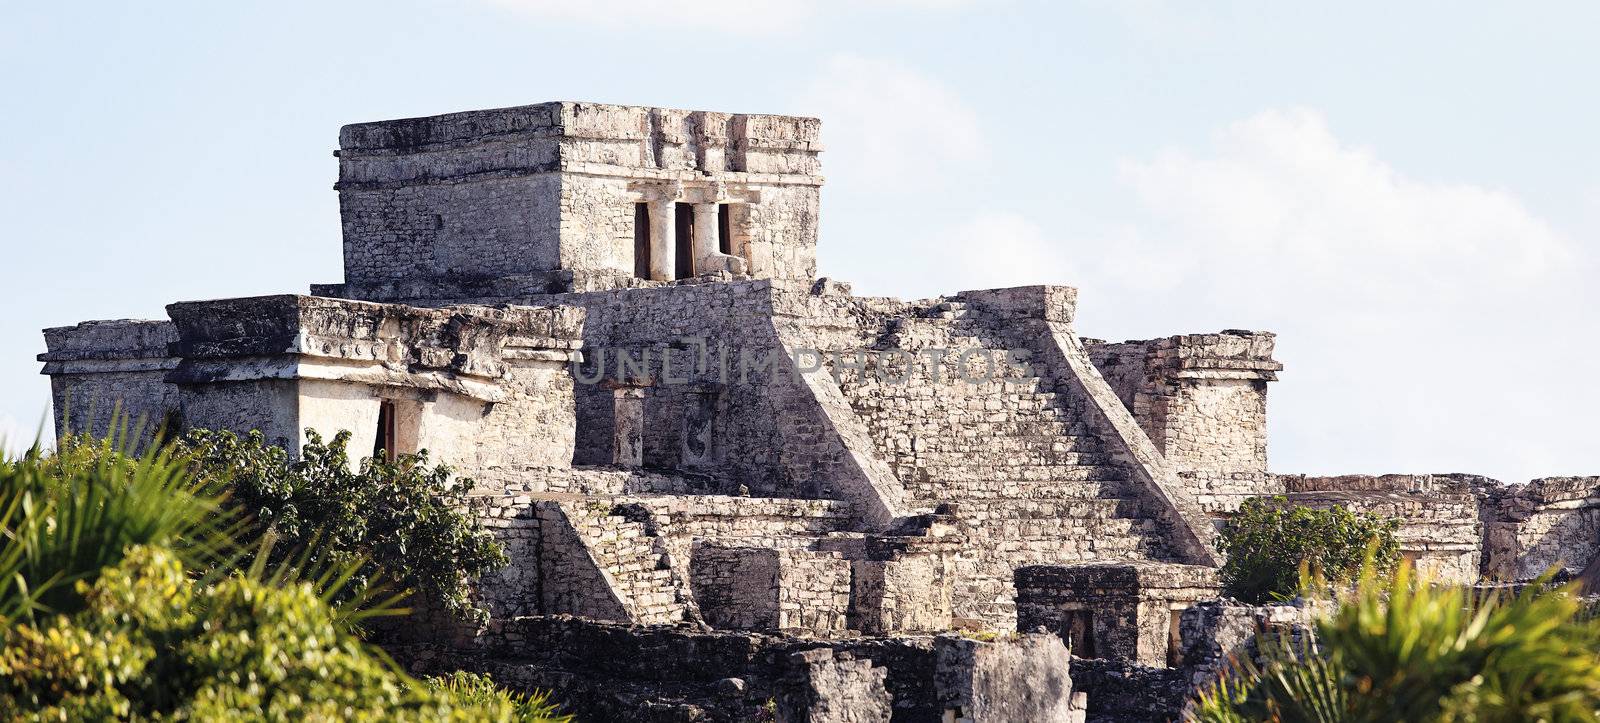 panoramic view of Tulum ruins by vwalakte